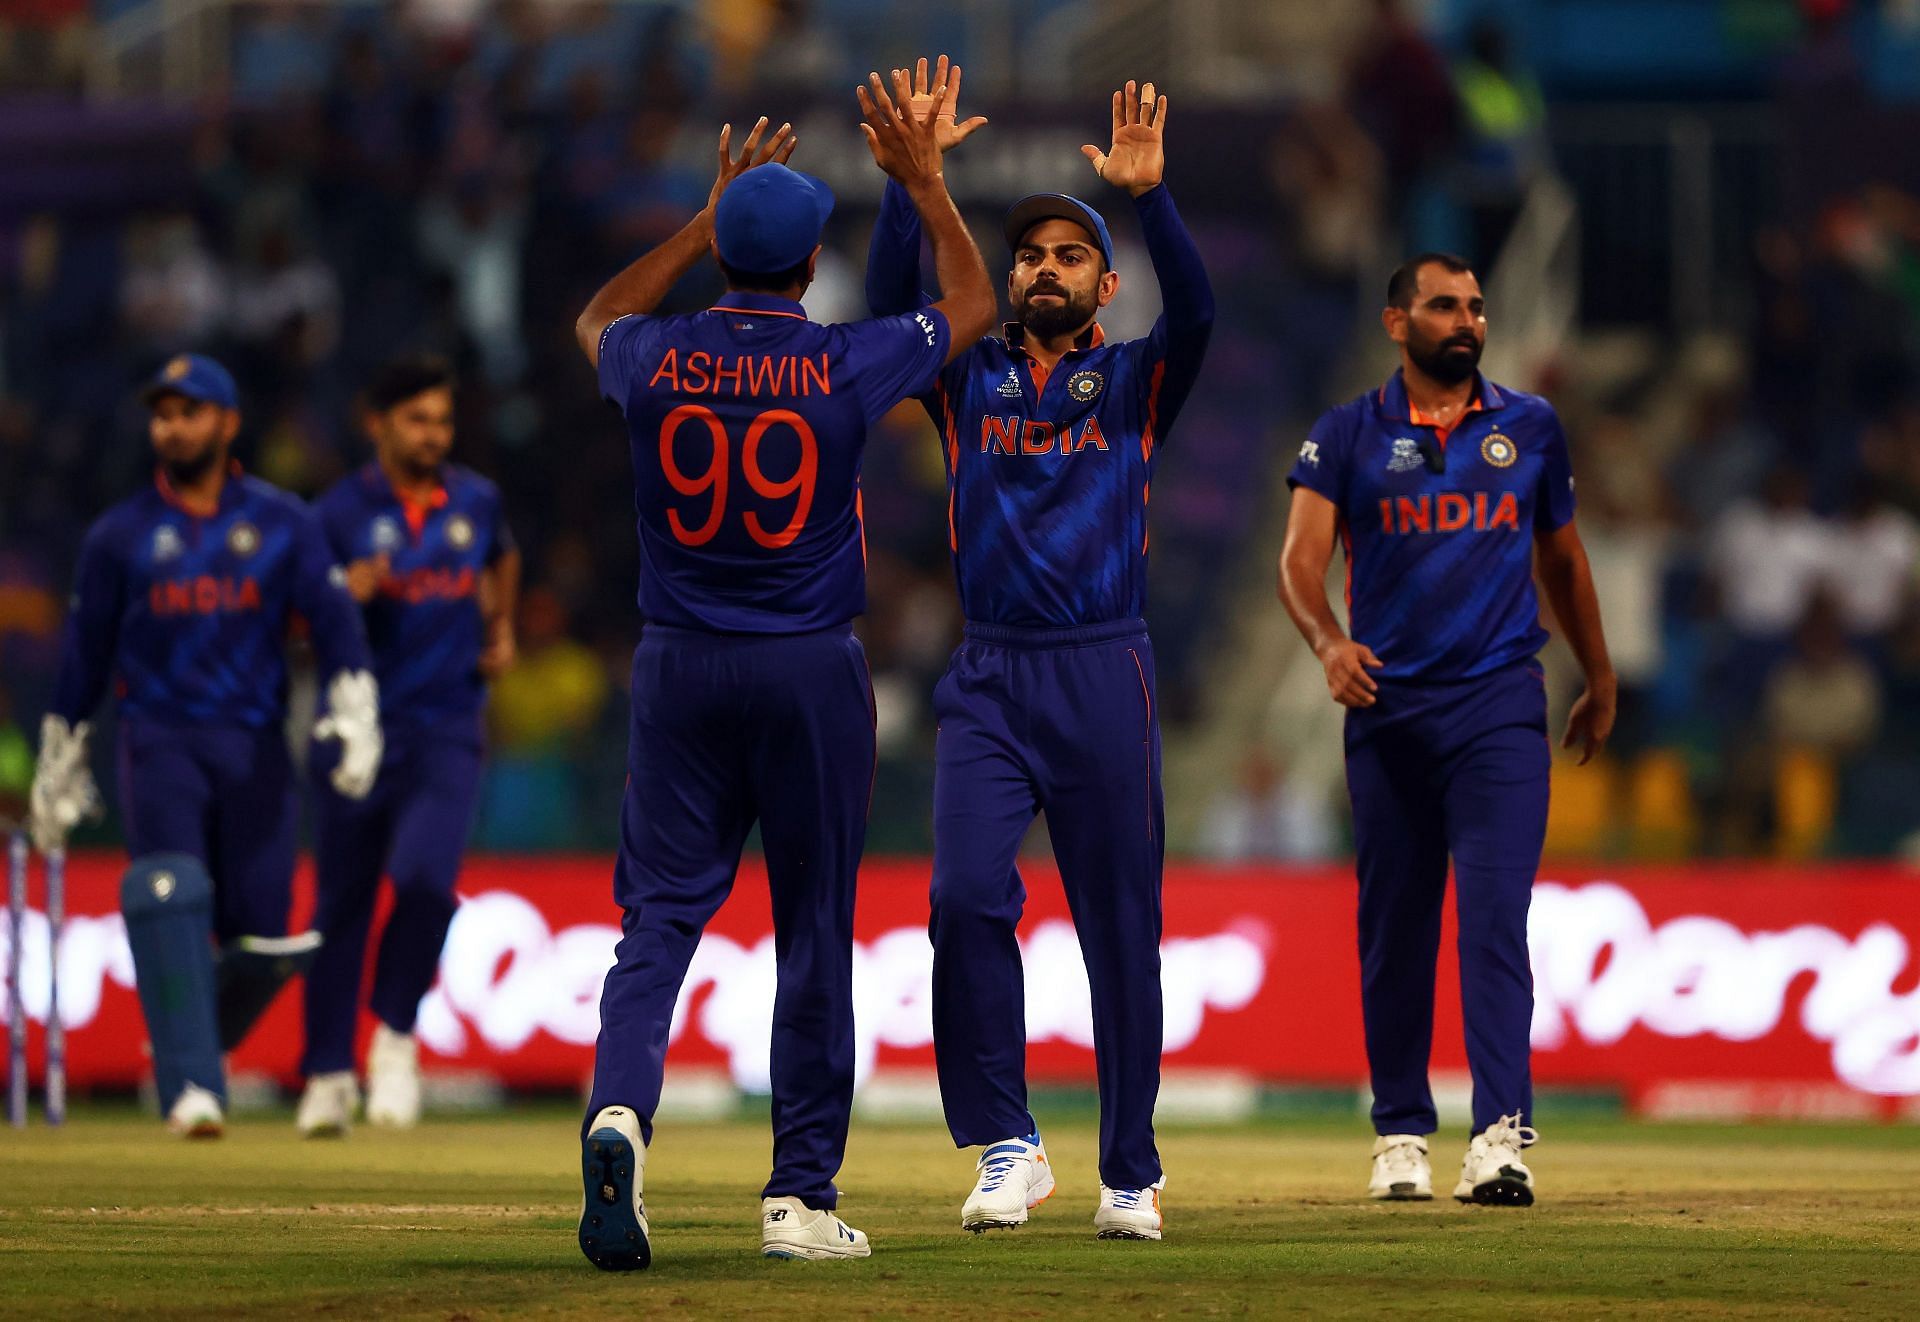 T20 World Cup 2021 India vs Scotland live telecast channel in India and live streaming details